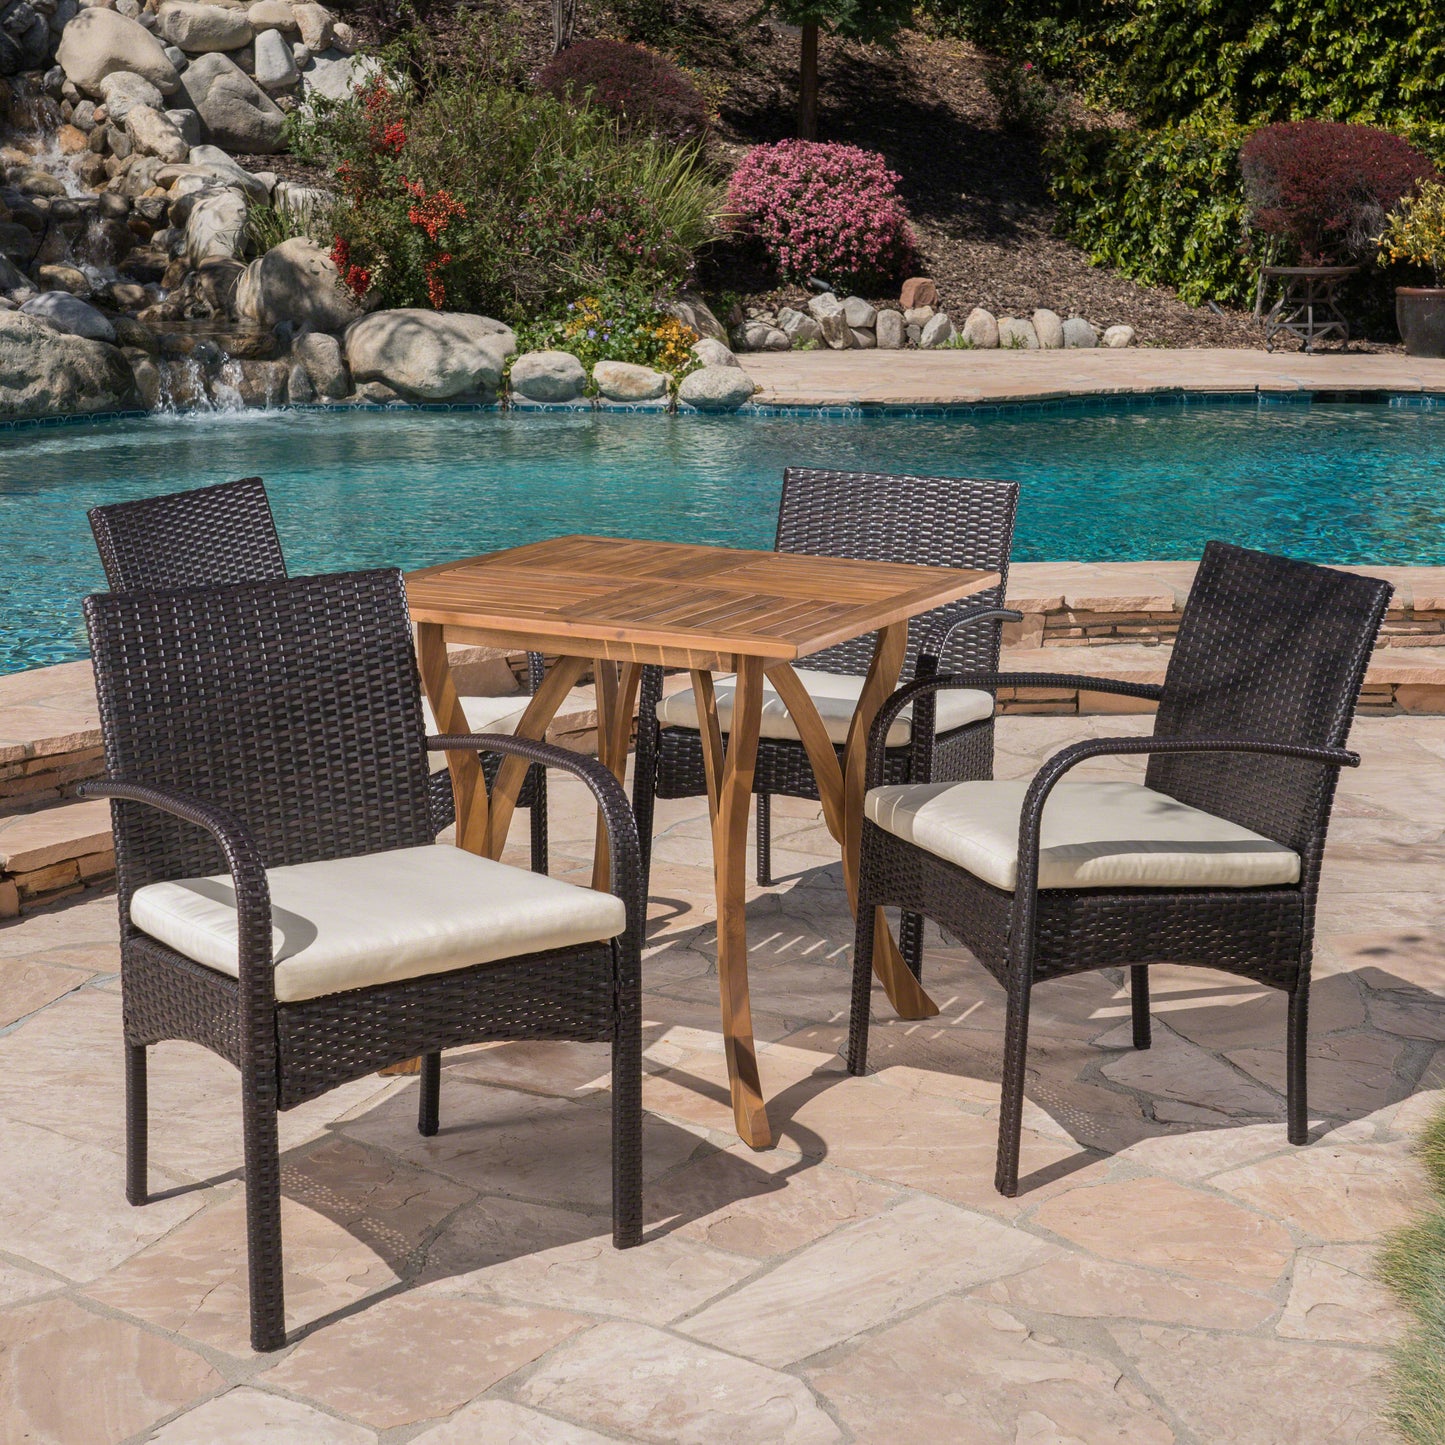 Derek Outdoor 5 Piece Acacia Wood/ Wicker Dining Set with Cushions, Teak Finish and Multibrown with Crème